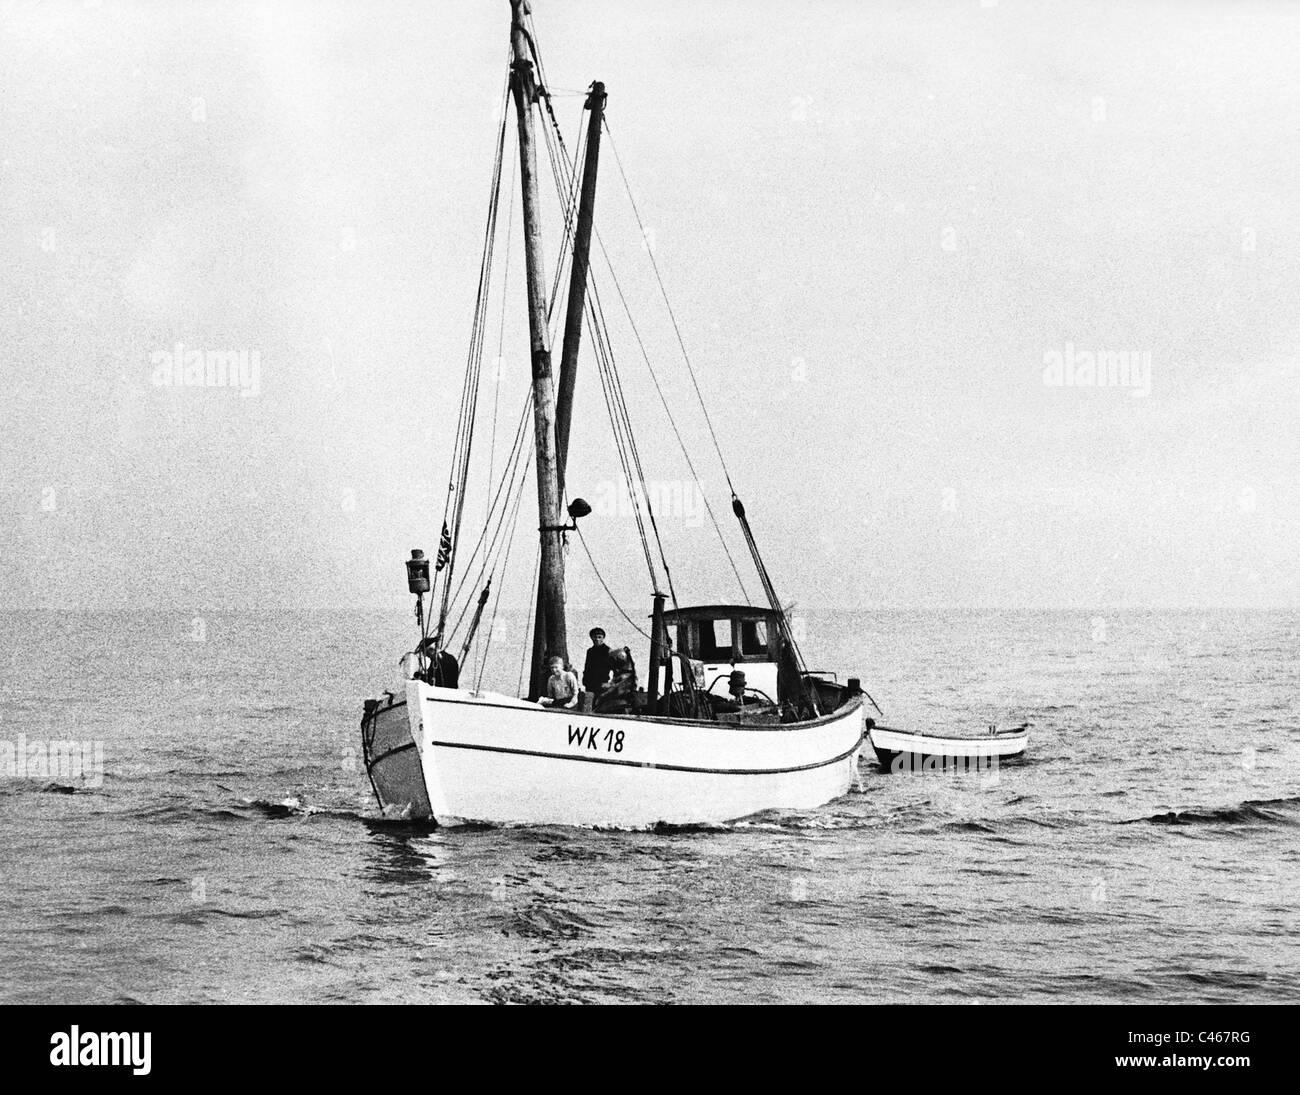 Boat fishing sea Black and White Stock Photos & Images - Alamy